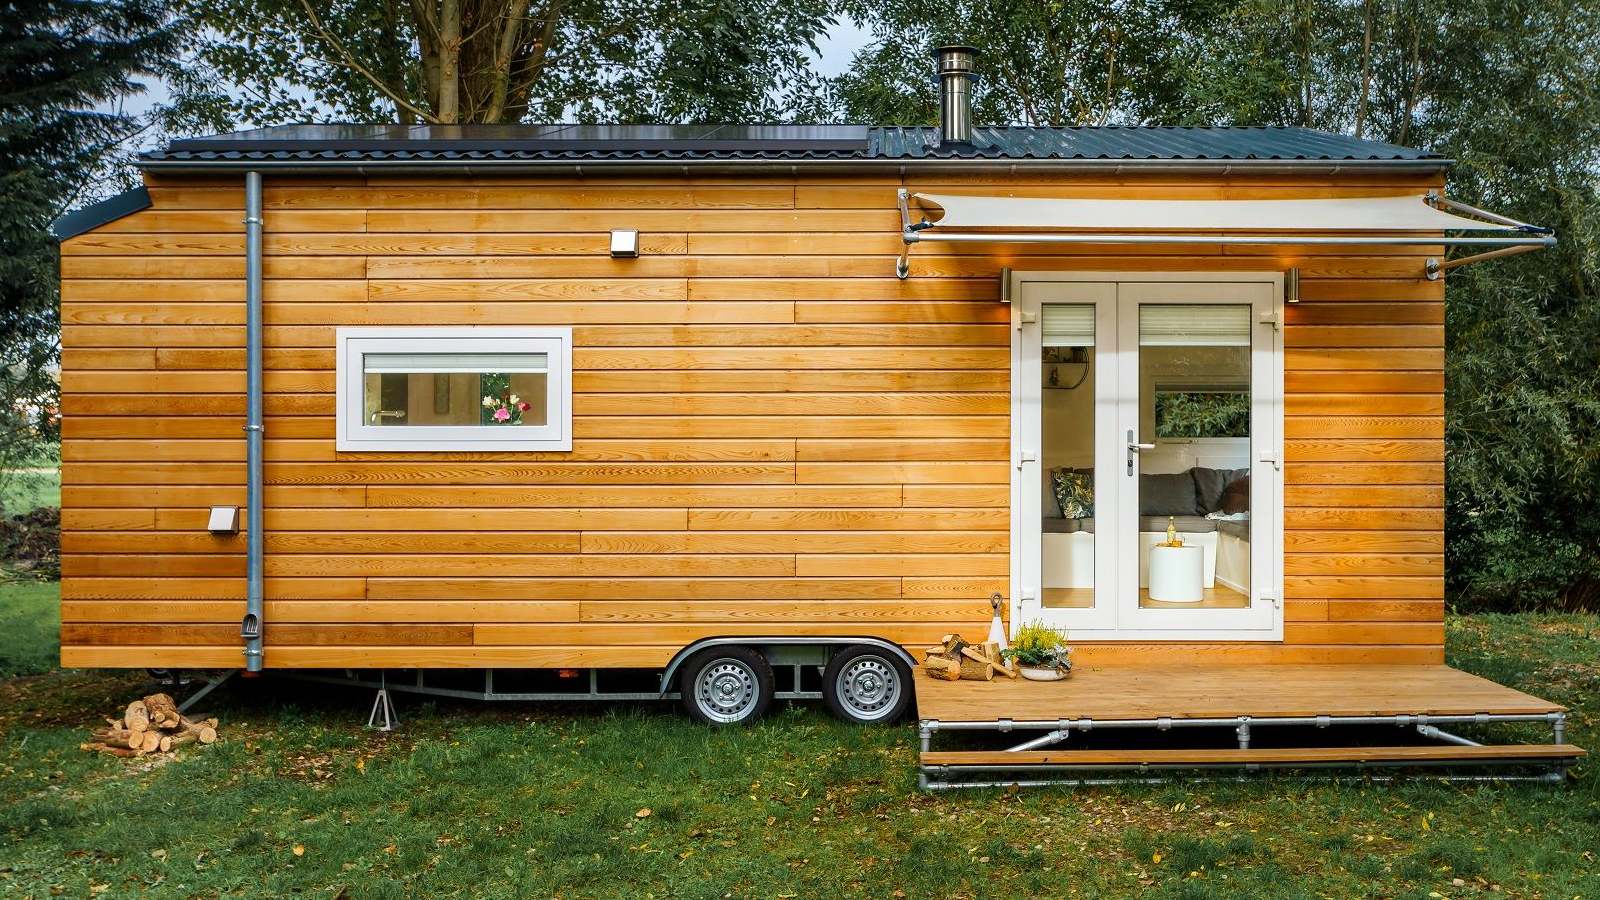 Tiny home on trailer